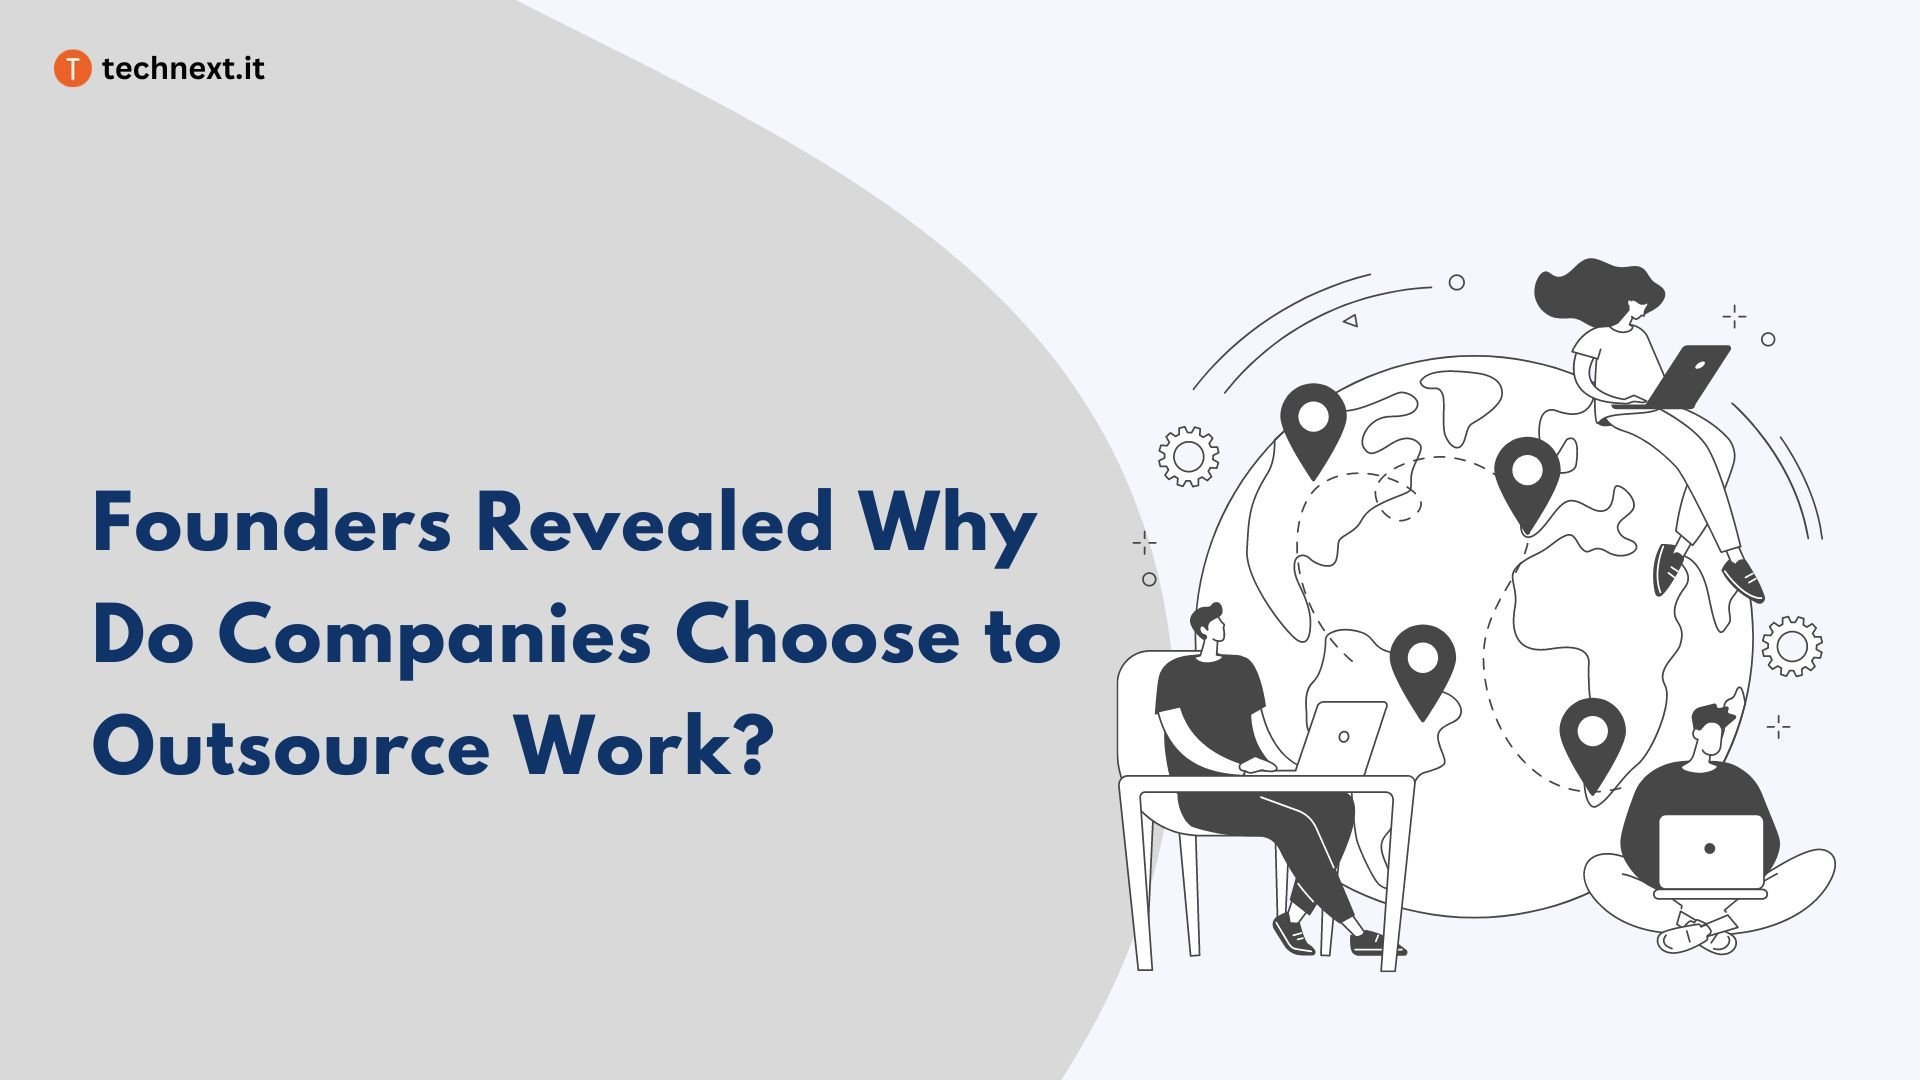 Founders Revealed Why Do Companies Choose to Outsource Work?